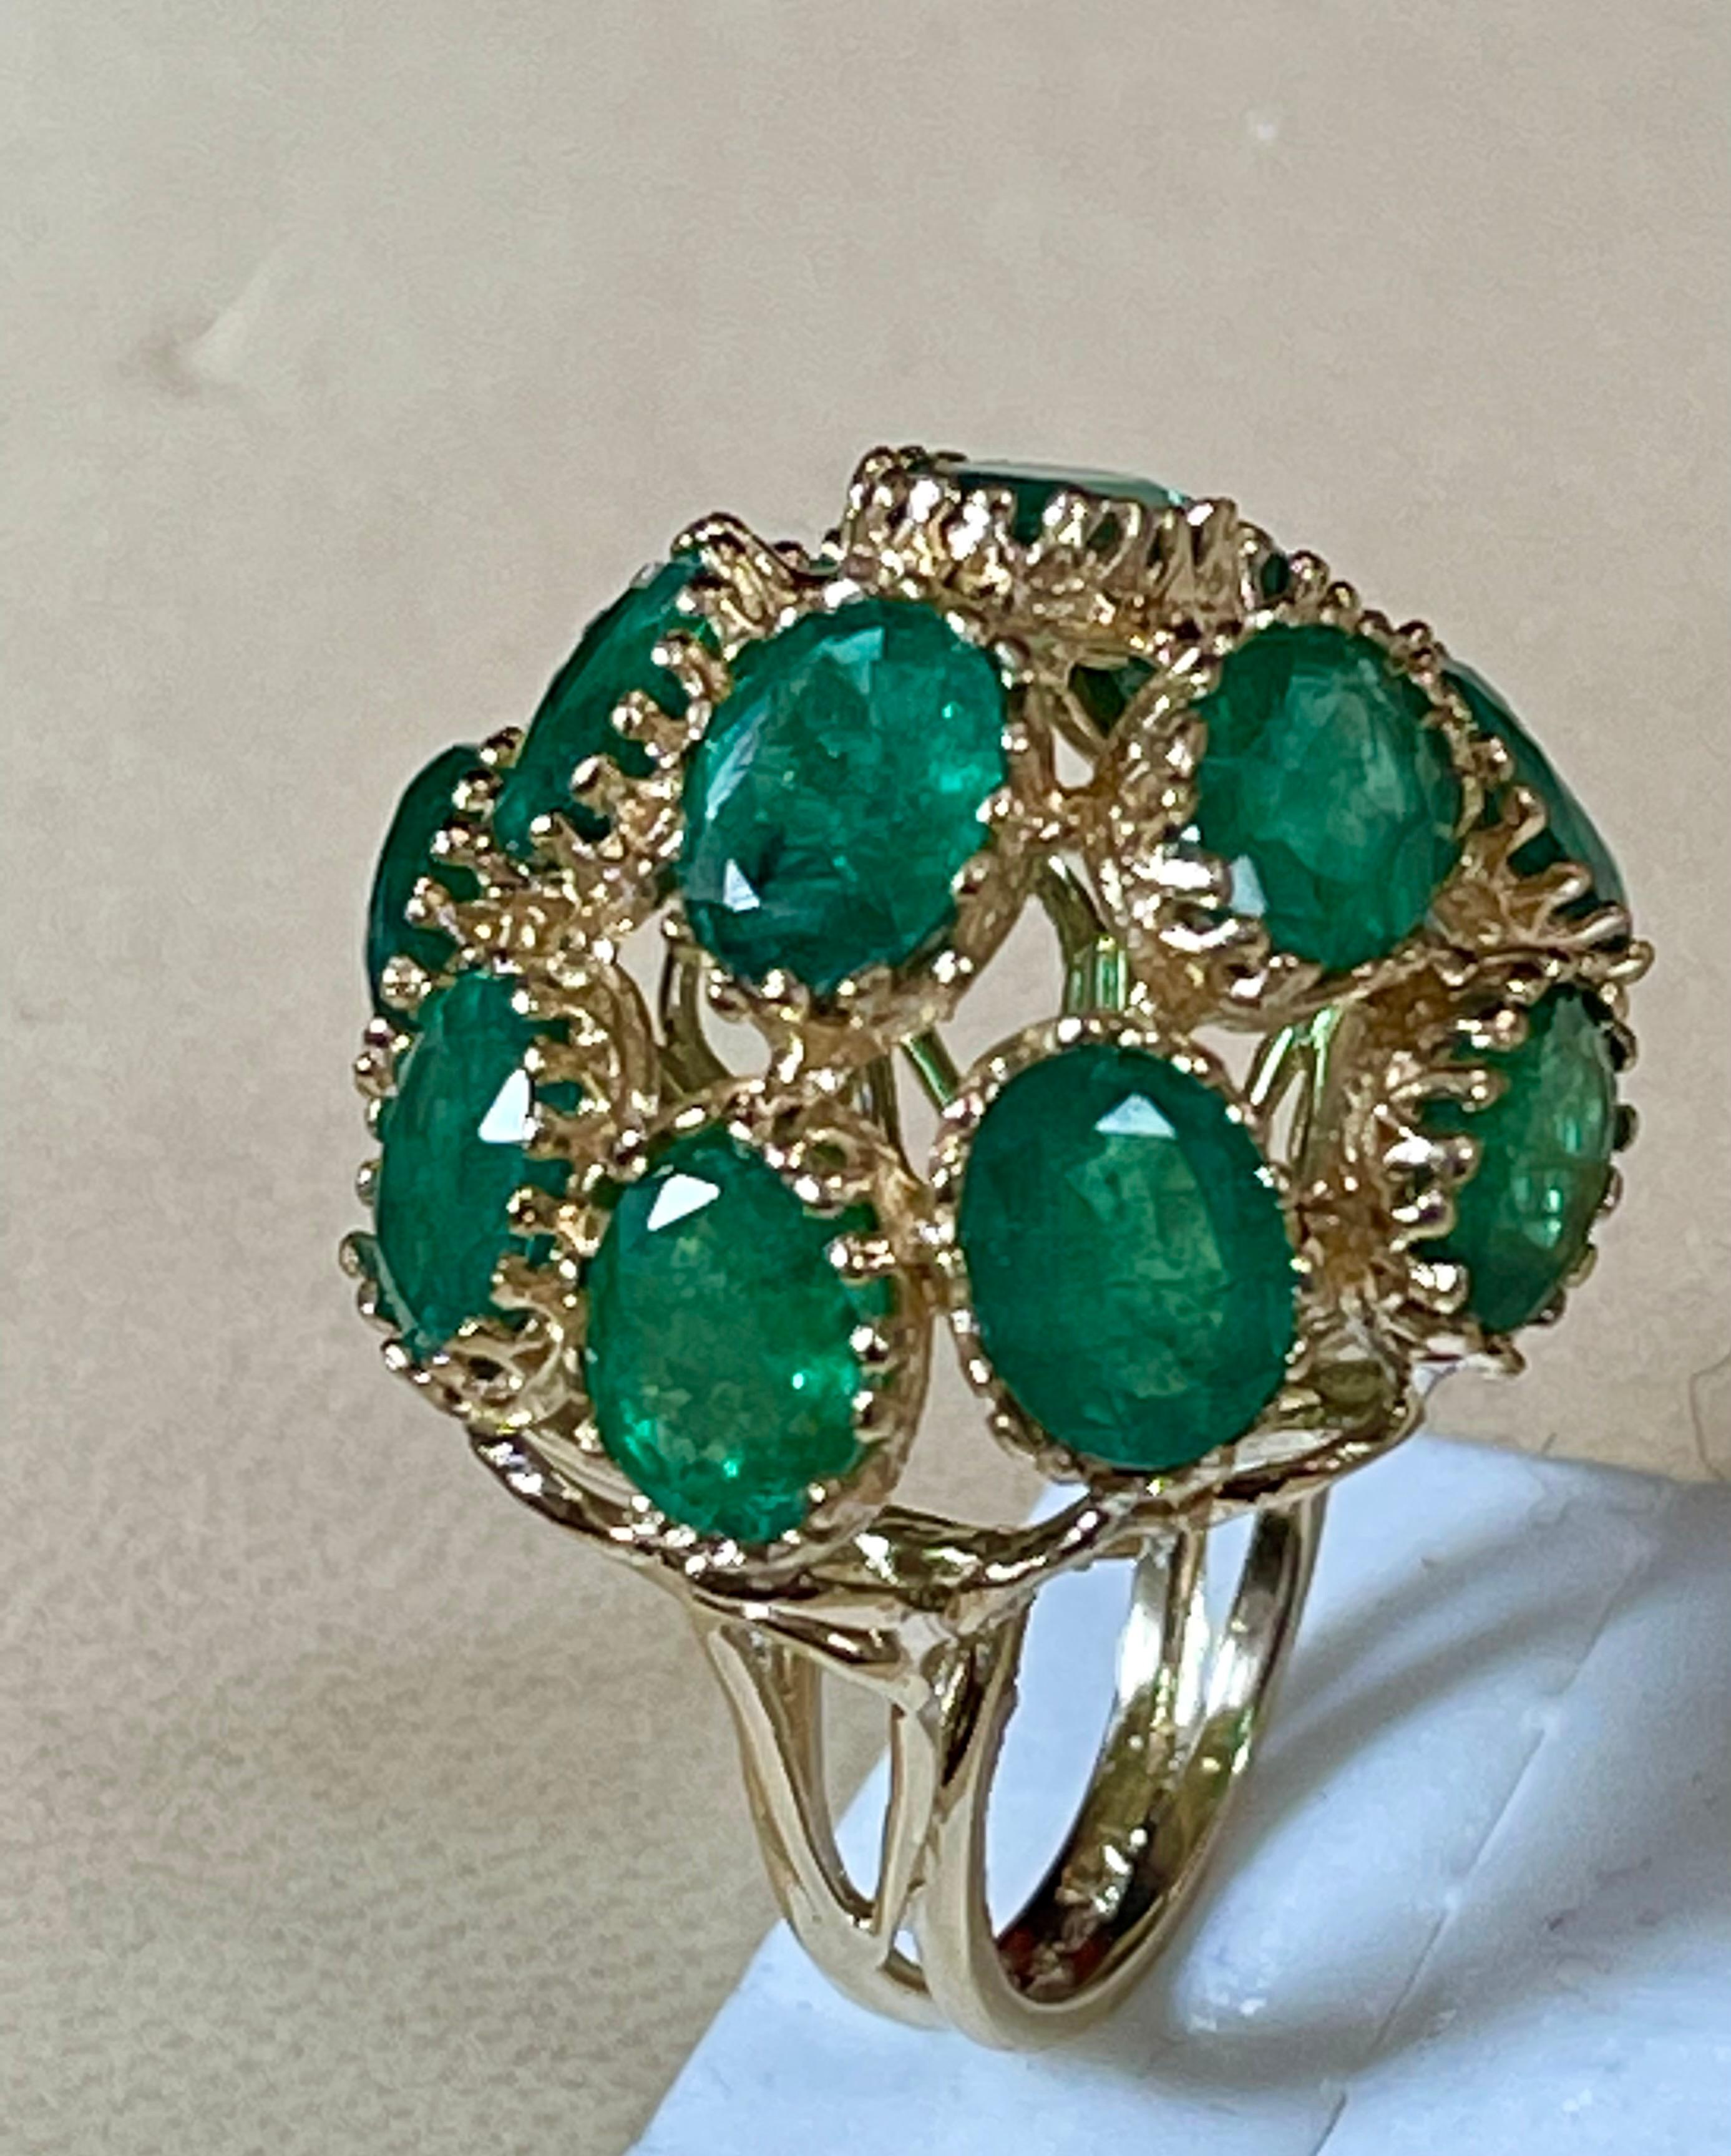 22Ct Natural Emerald, 12 Oval Stone Dome Shape Cocktail Ring 14 Kt Yellow Gold For Sale 4